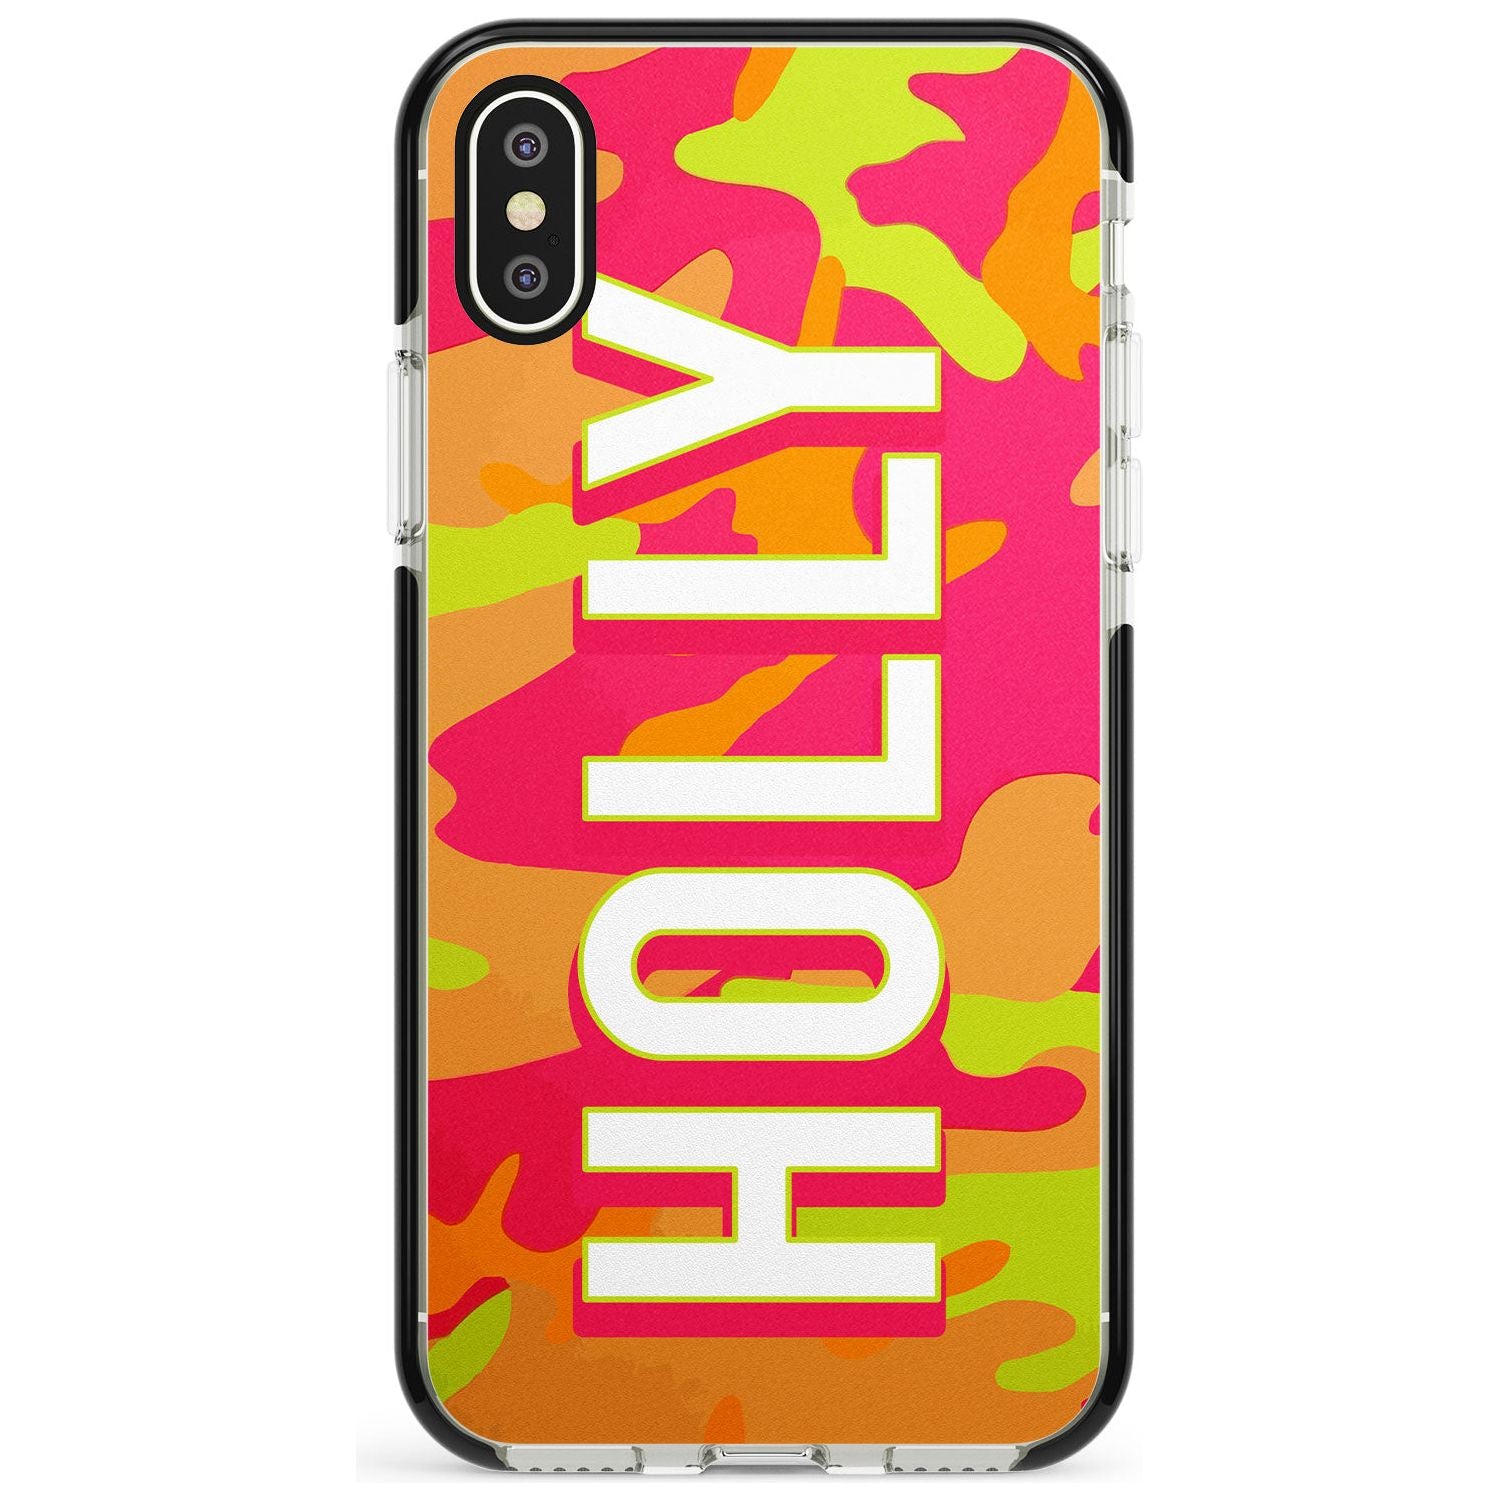 Colourful Neon Camo Pink Fade Impact Phone Case for iPhone X XS Max XR